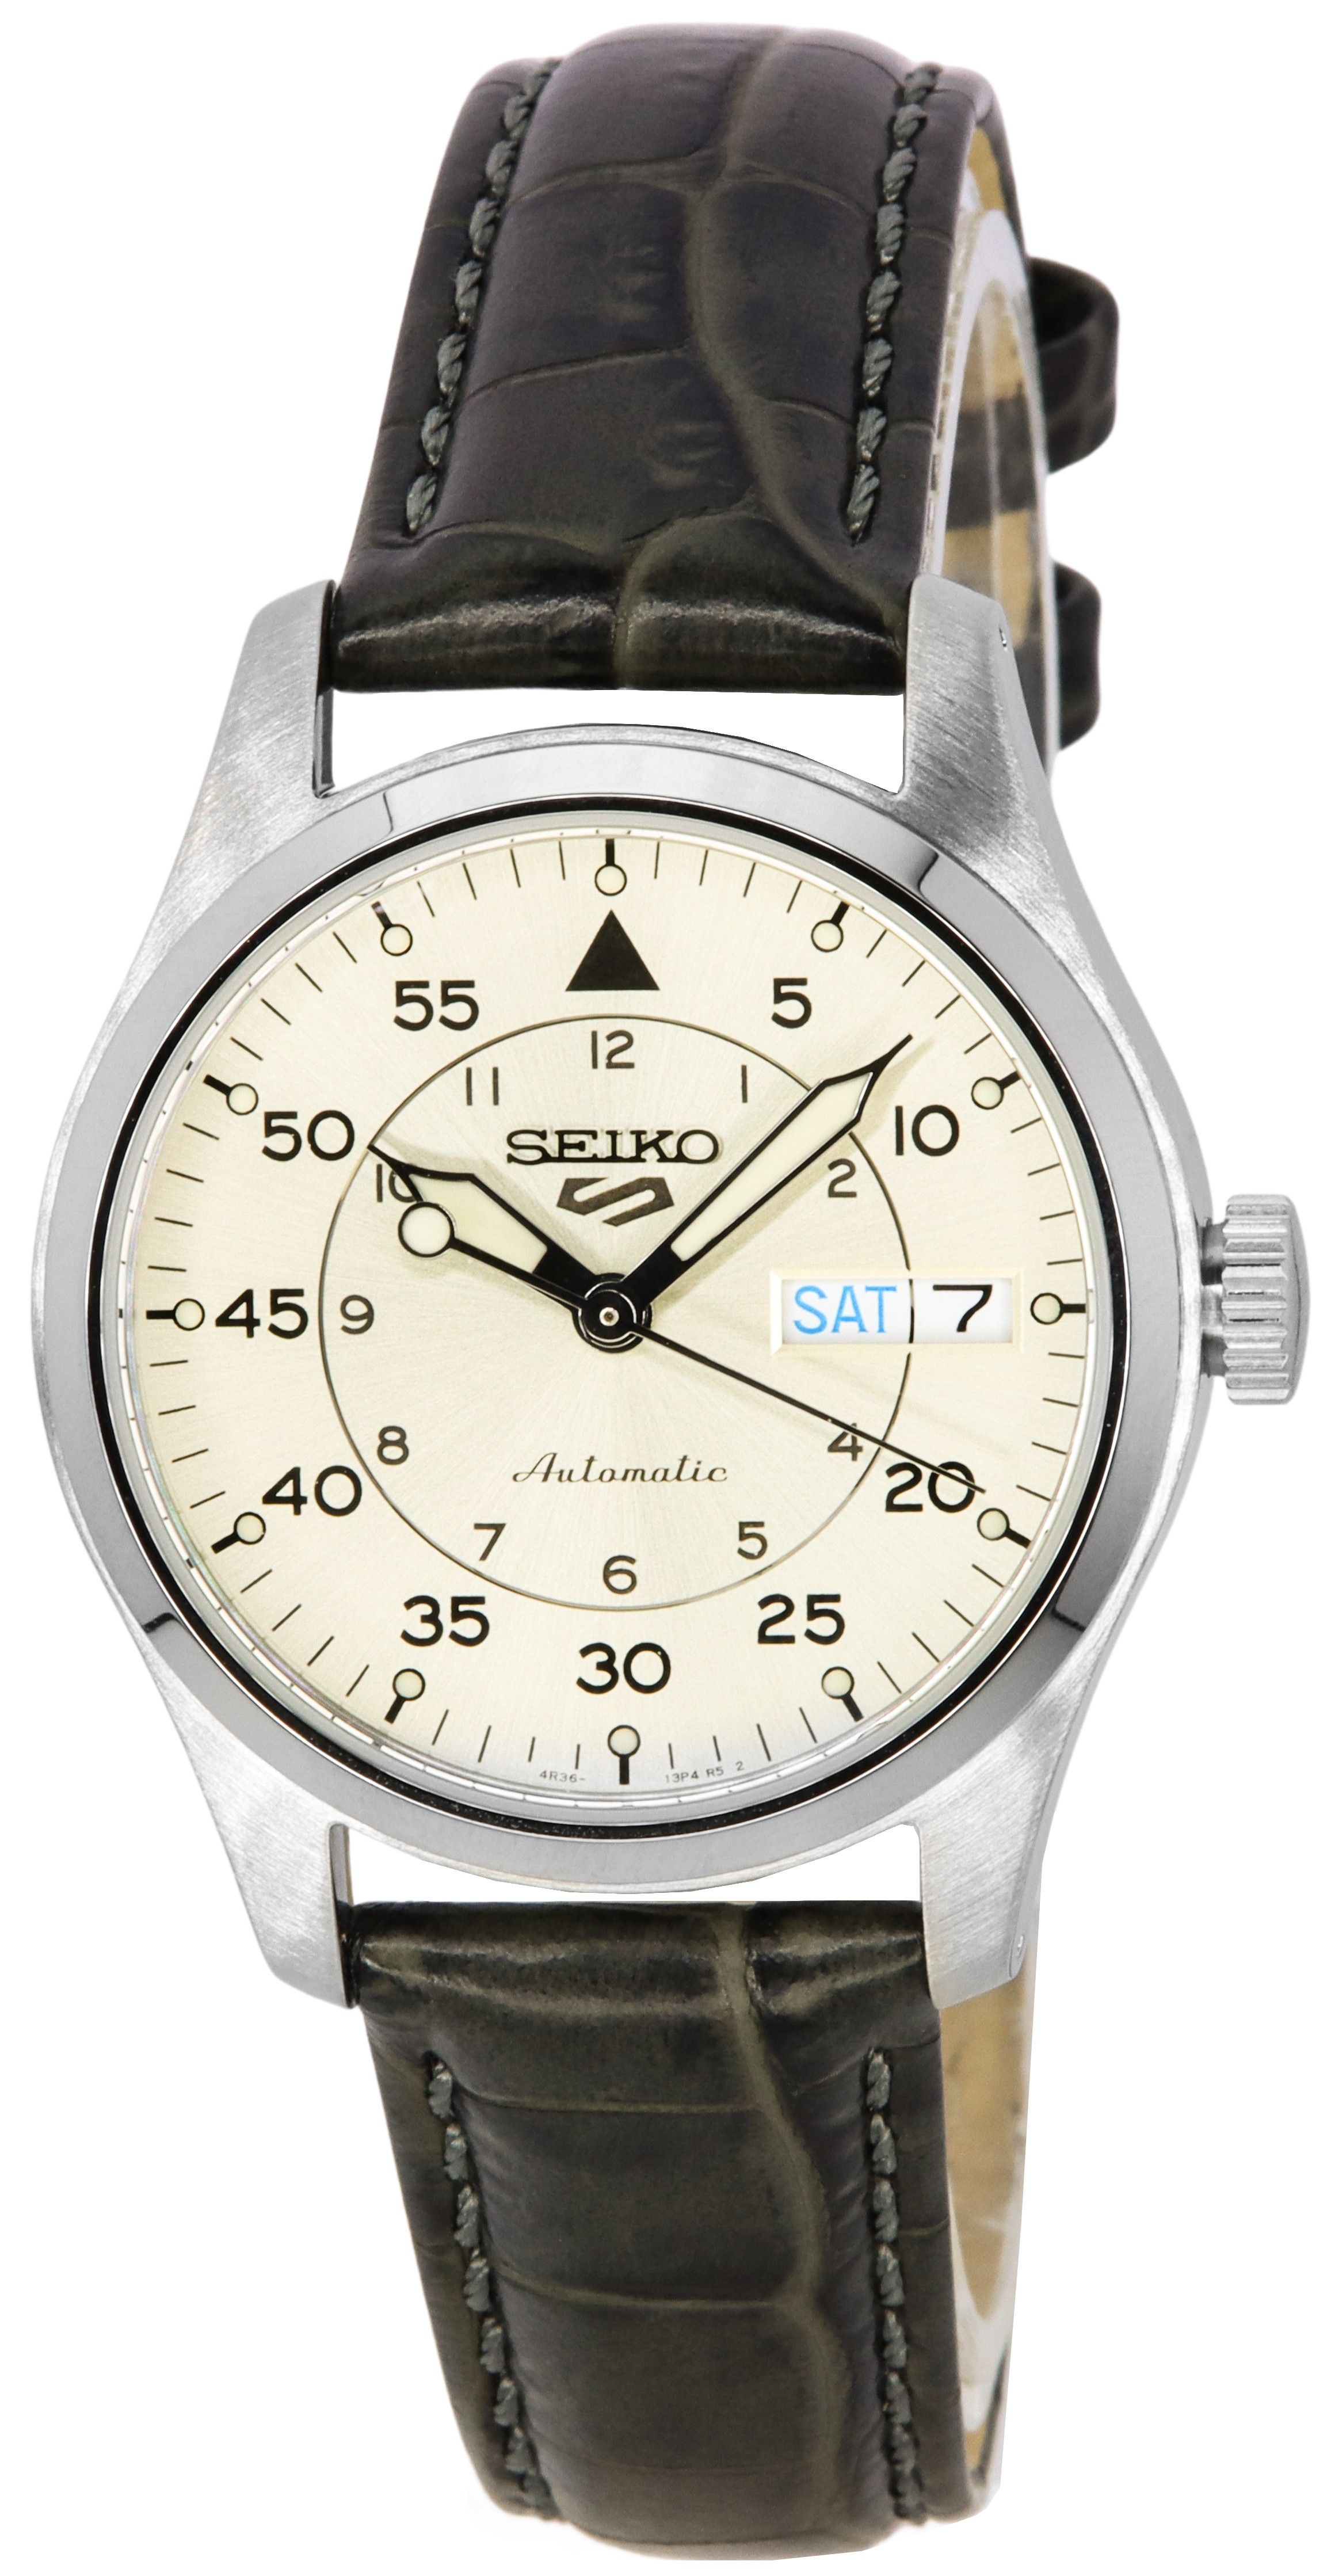 Seiko 5 Sports GMT Champagne Flieger Suit Style Leather Strap Automatic SRPJ87K1 100M Men's Watch